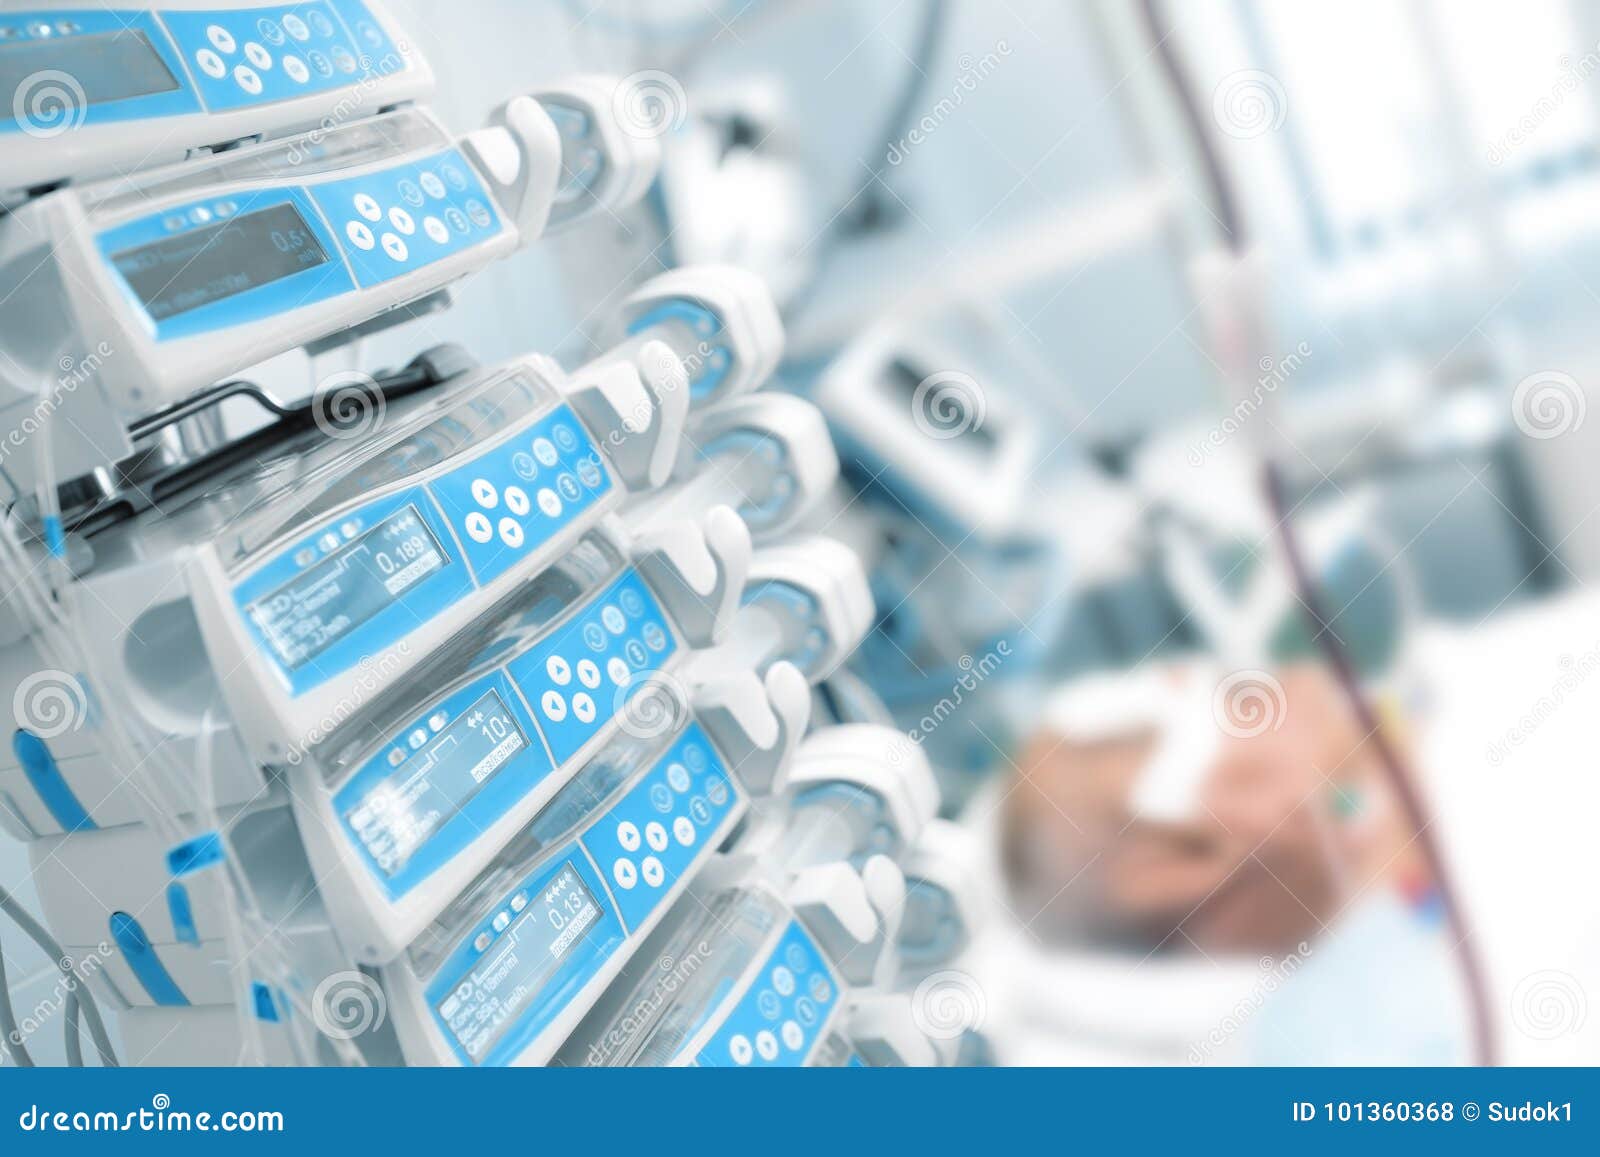 Comatose Patient Photos Free Royalty Free Stock Photos From Dreamstime